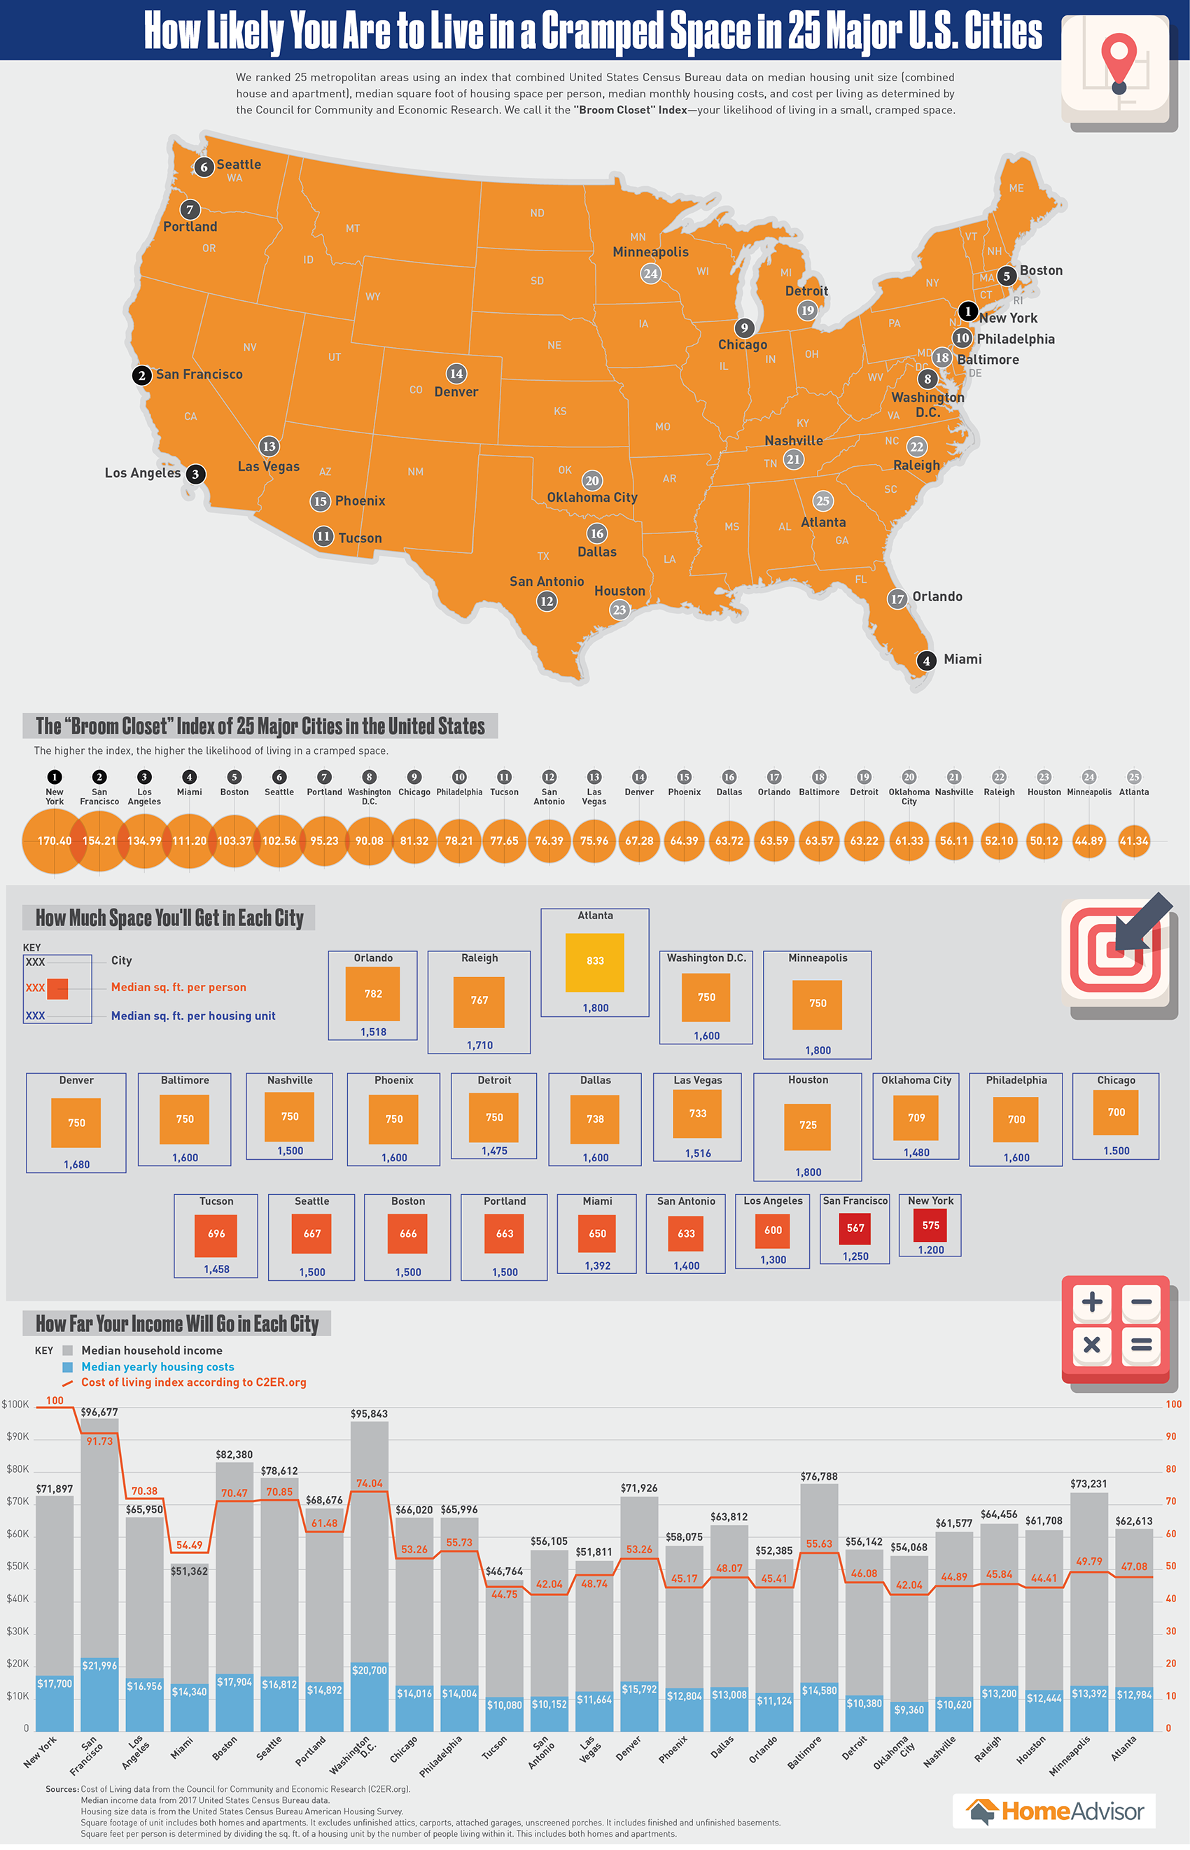 How Likely You Are to Live in a Cramped Space in 25 Major U.S. Cities - HomeAdvisor.com - Infographic